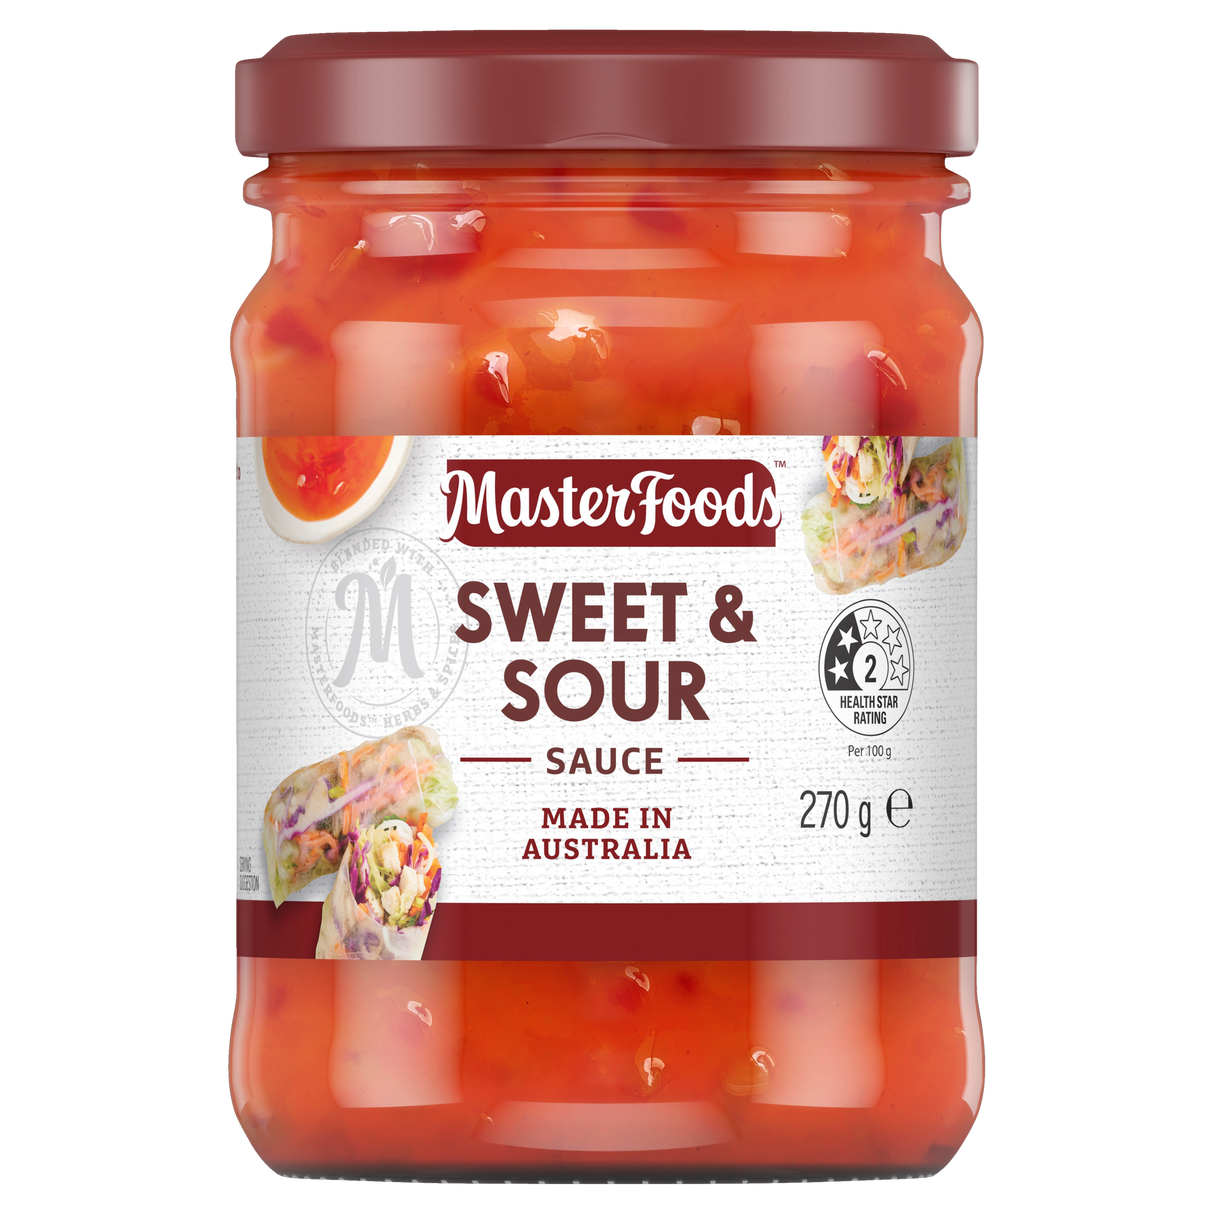 MasterFoods Sweet & Sour Sauce 270g